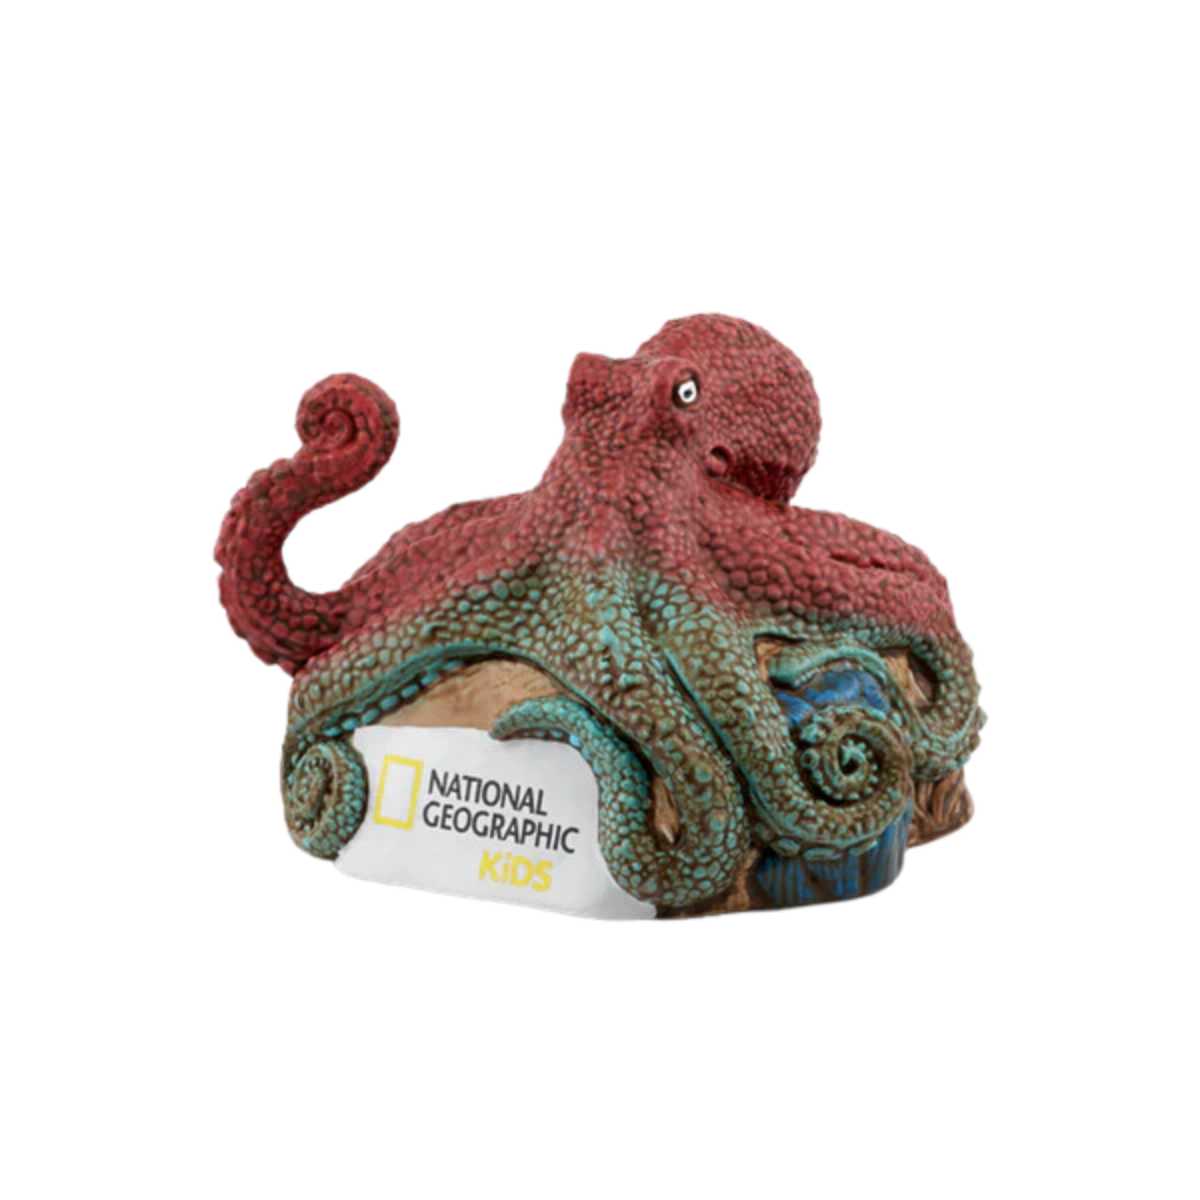 Tonies National Geographic: Octopus Audio Play Figurine, 840147413239 - ANB Baby